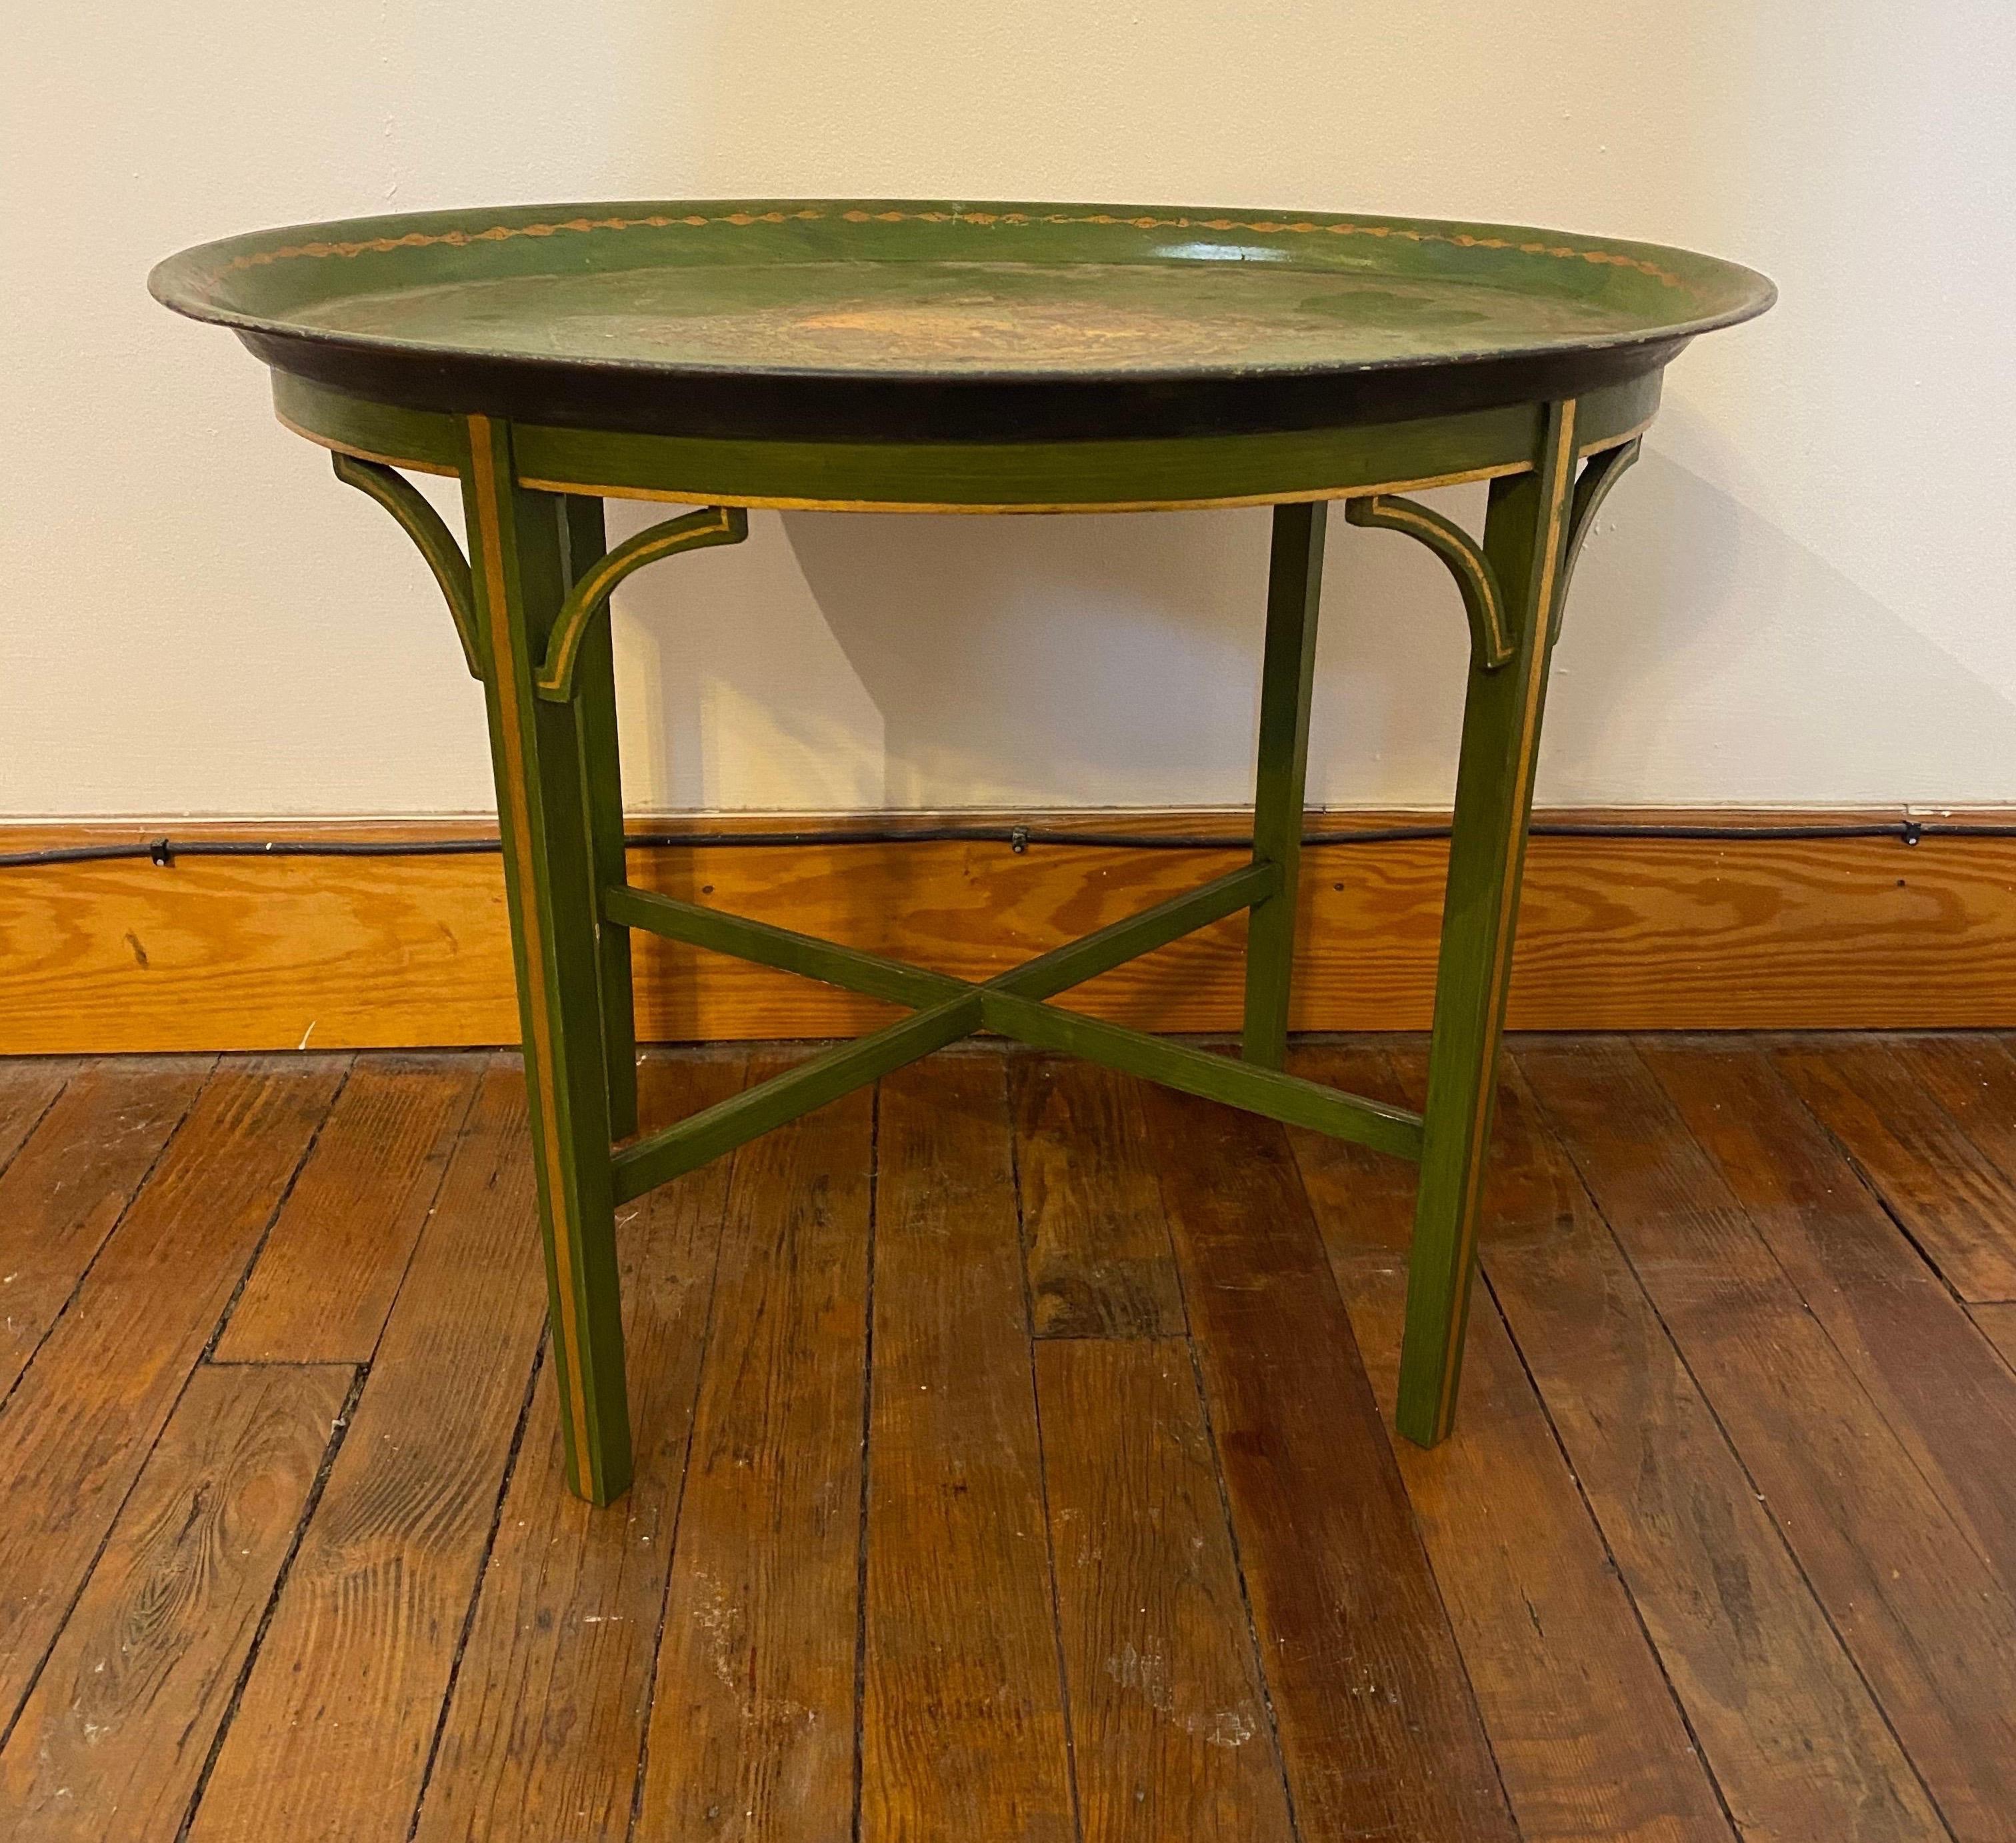 Late 19th century told tray mounted as side table on wooden base.